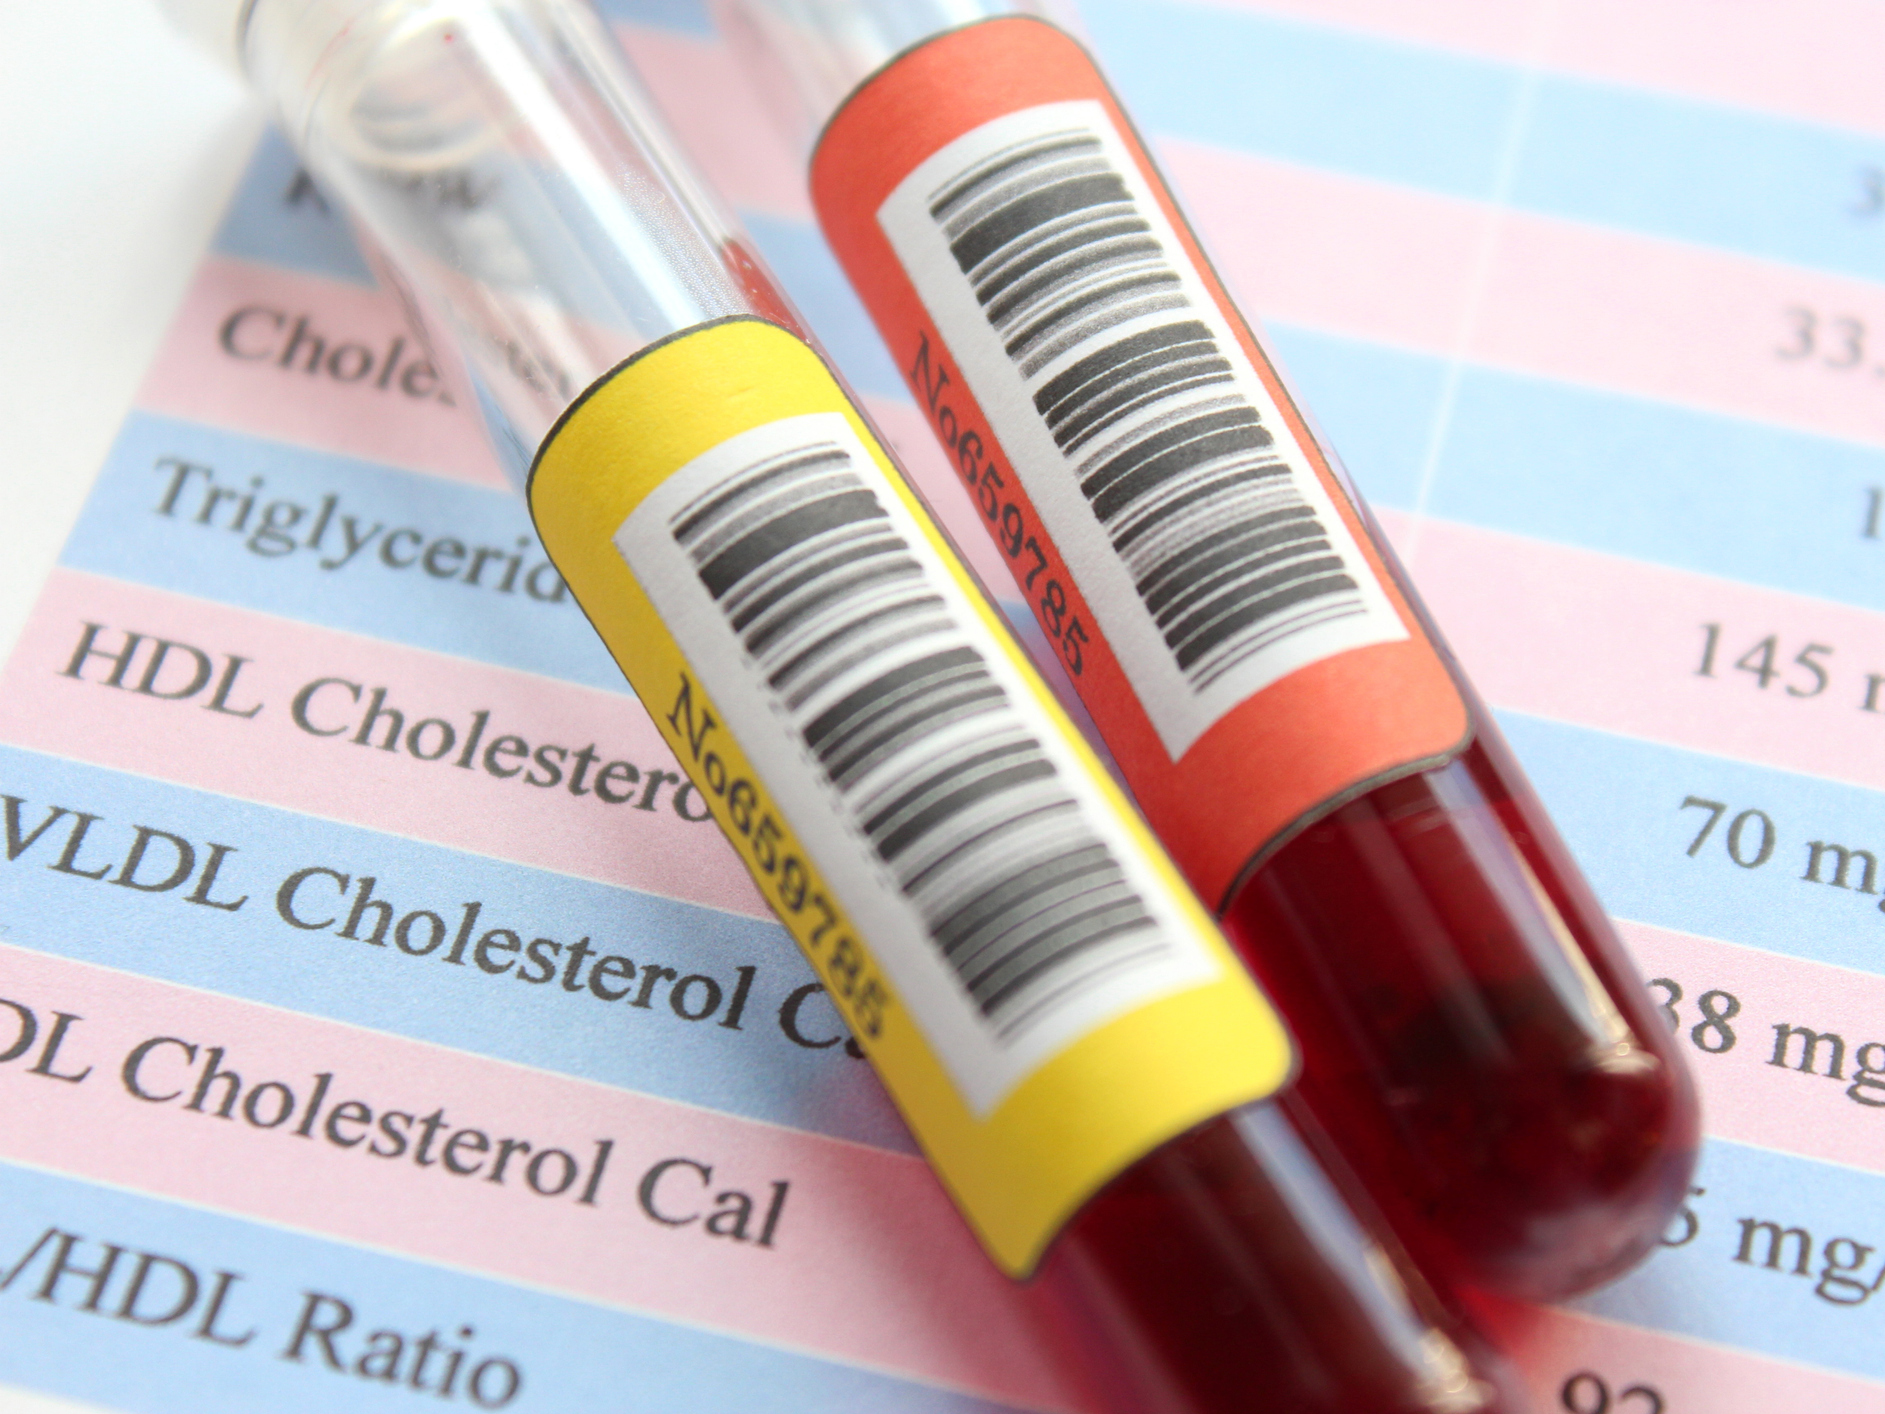 What really matters about cholesterol in the big scheme of things